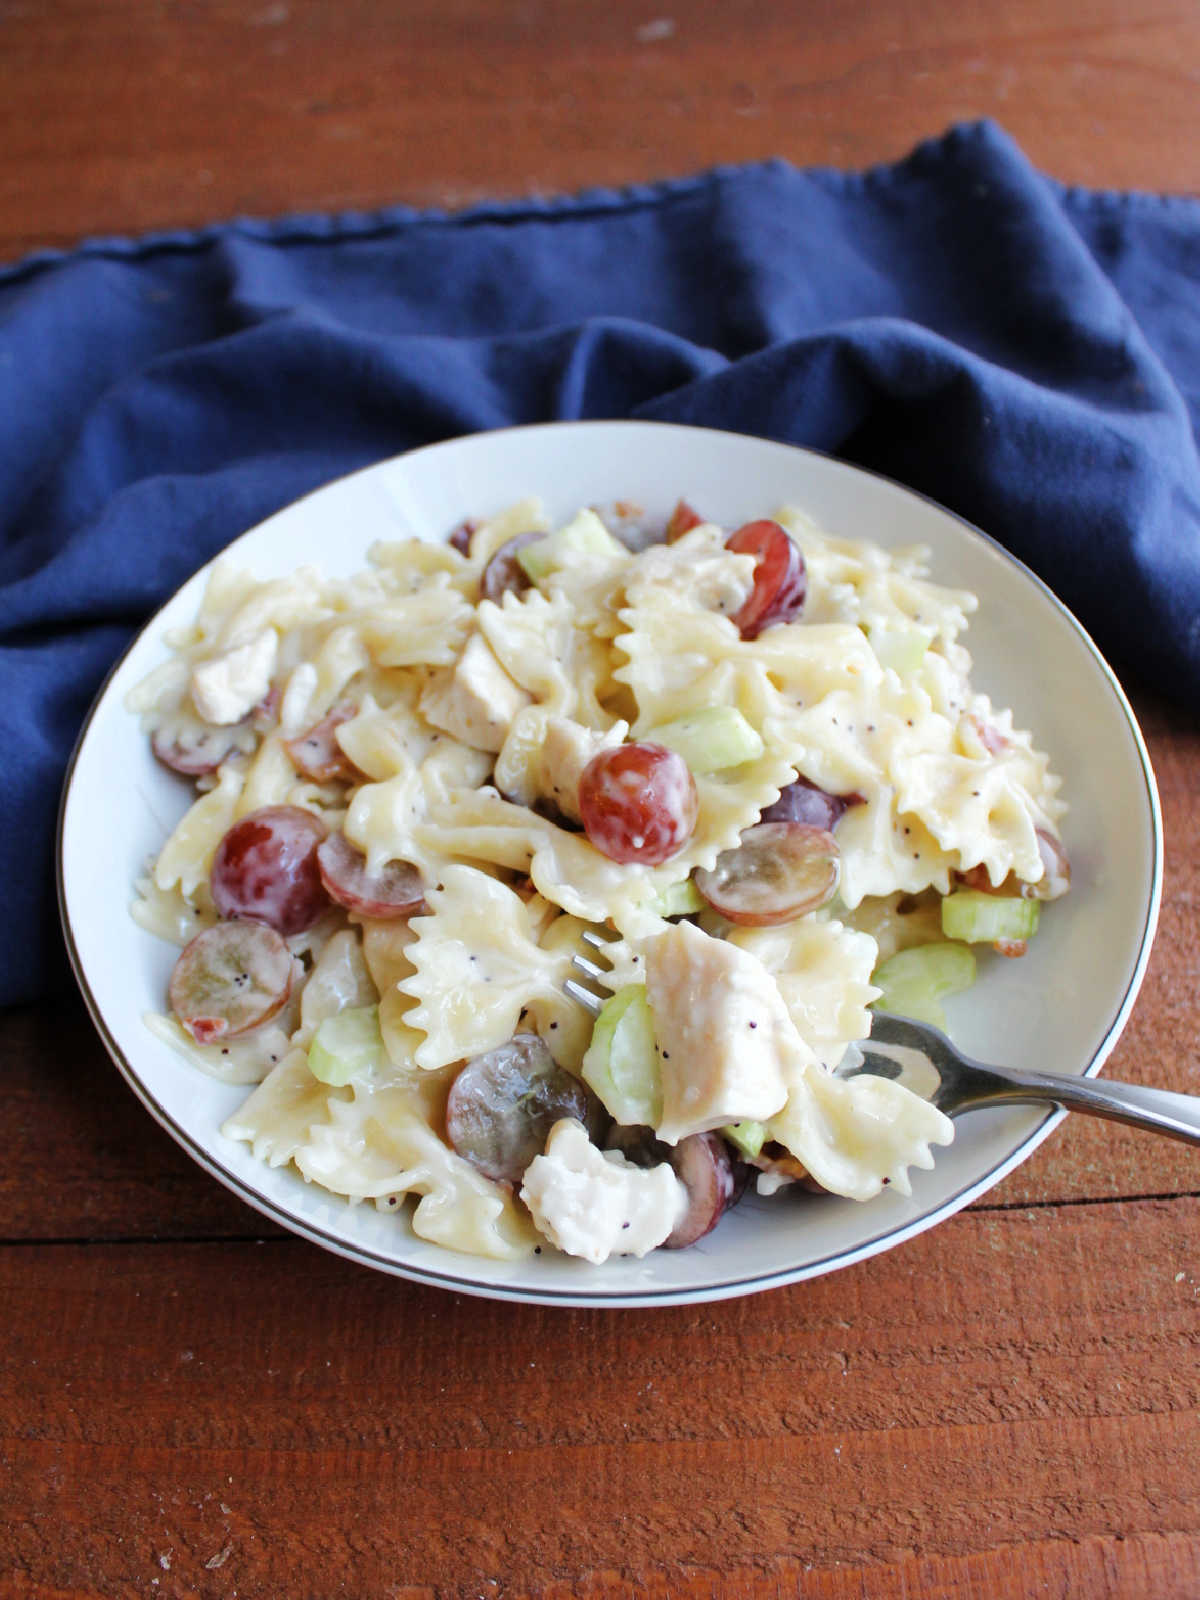 Bowl of chicken poppy seed macaroni salad with red grapes, bacon, and celery.